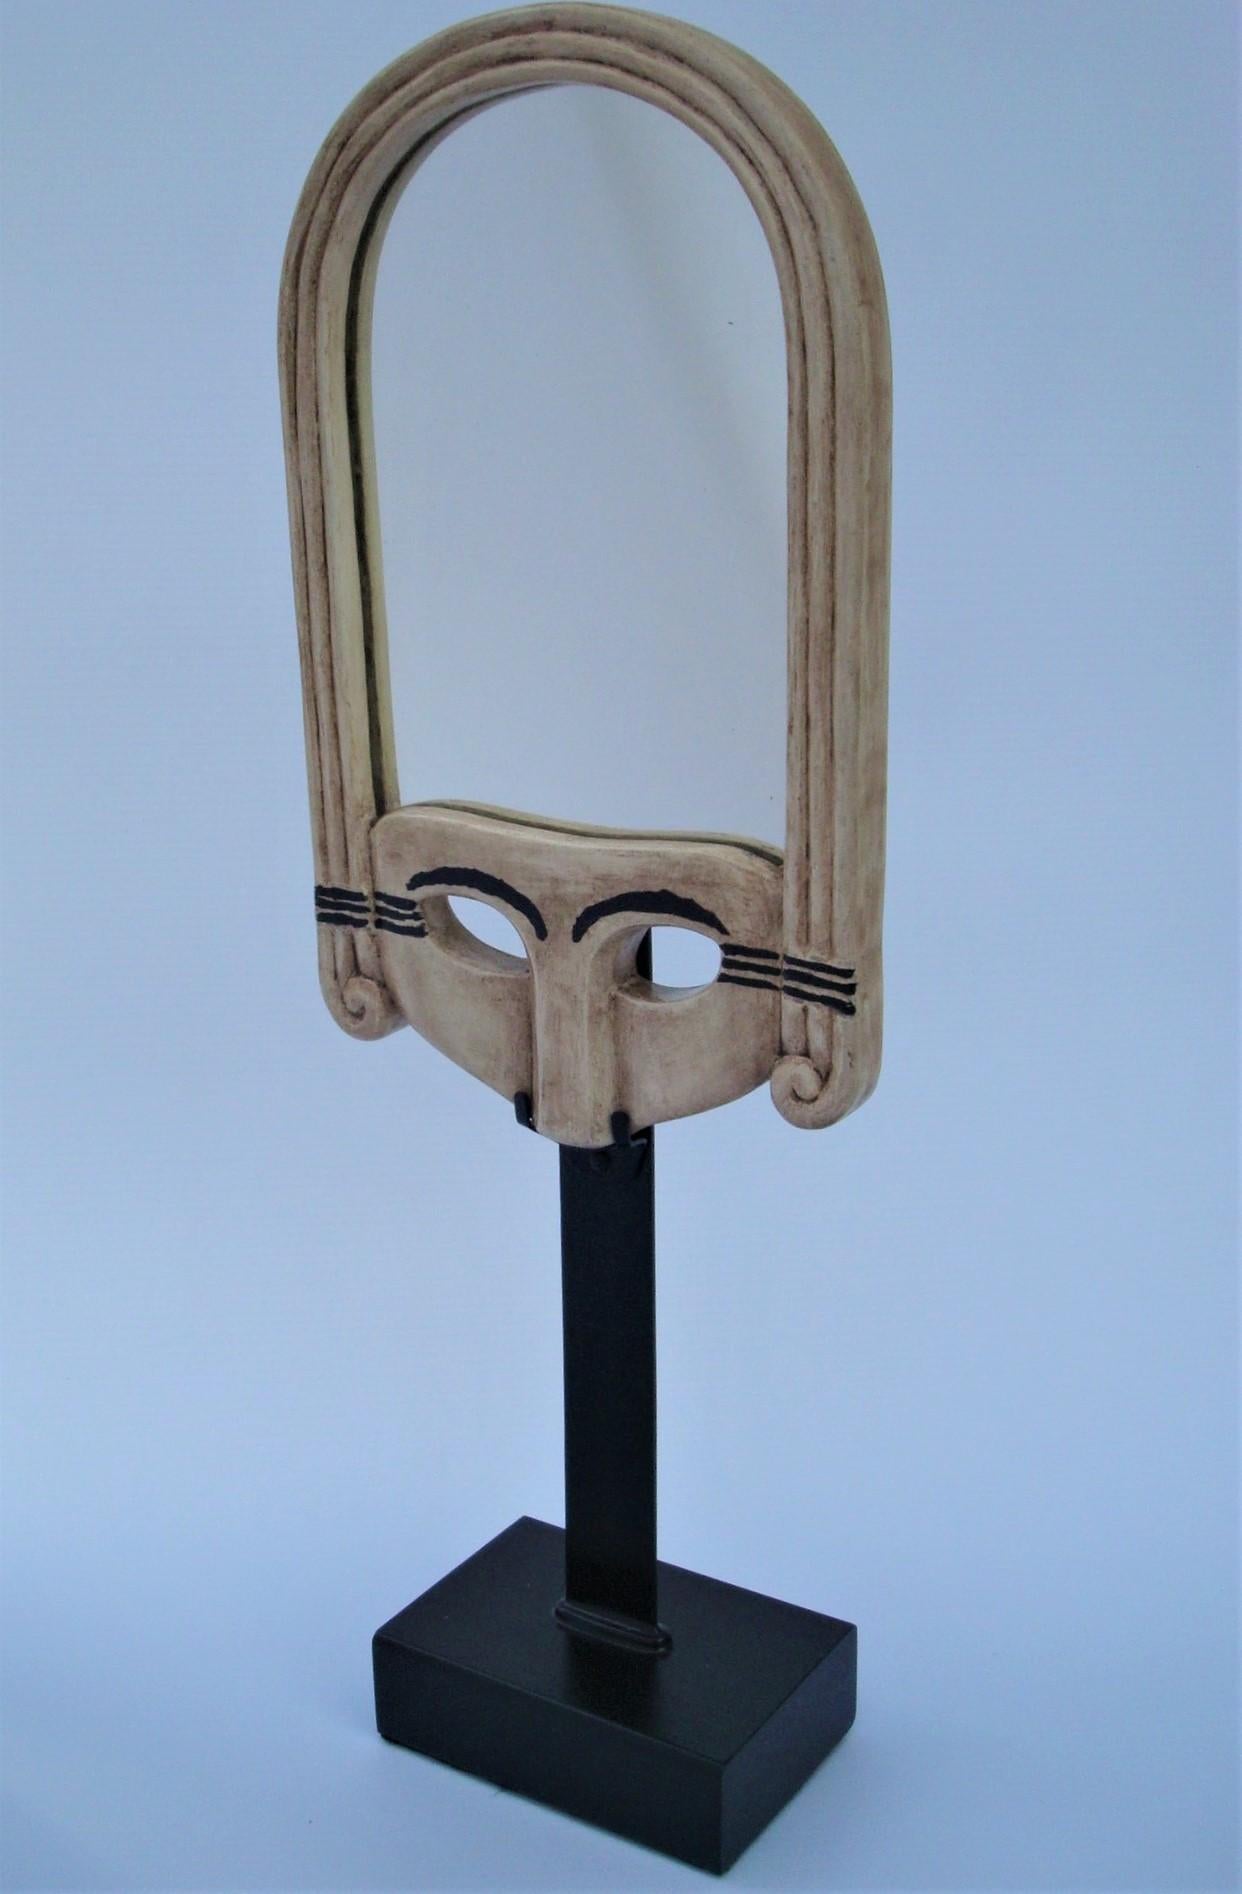 Albert Binquet
Hand mirror, circa 1921
Made of wood, painted in ivory color, representing a stylized mask, the eyebrows and outer edges of the eyes underlined with black paint
Measures: Height: 24 cm. (91/2 in.) ; Width: 14 cm. (51/2 in.)
Signed